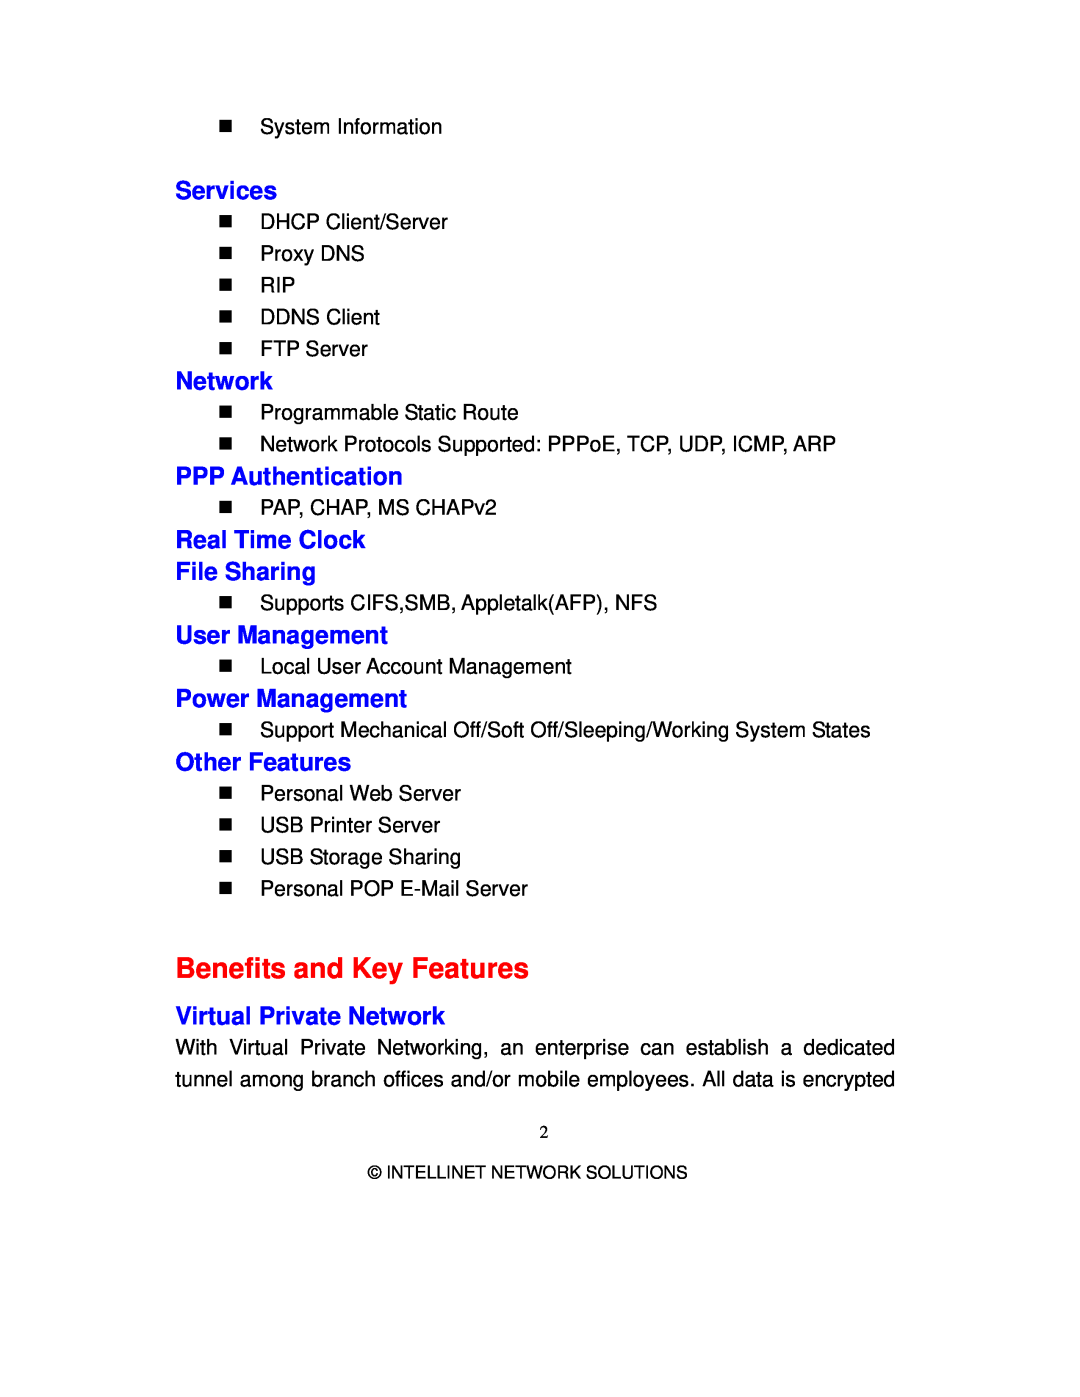 Intellinet Network Solutions 501705 Benefits and Key Features, Services, Network, PPP Authentication, User Management 